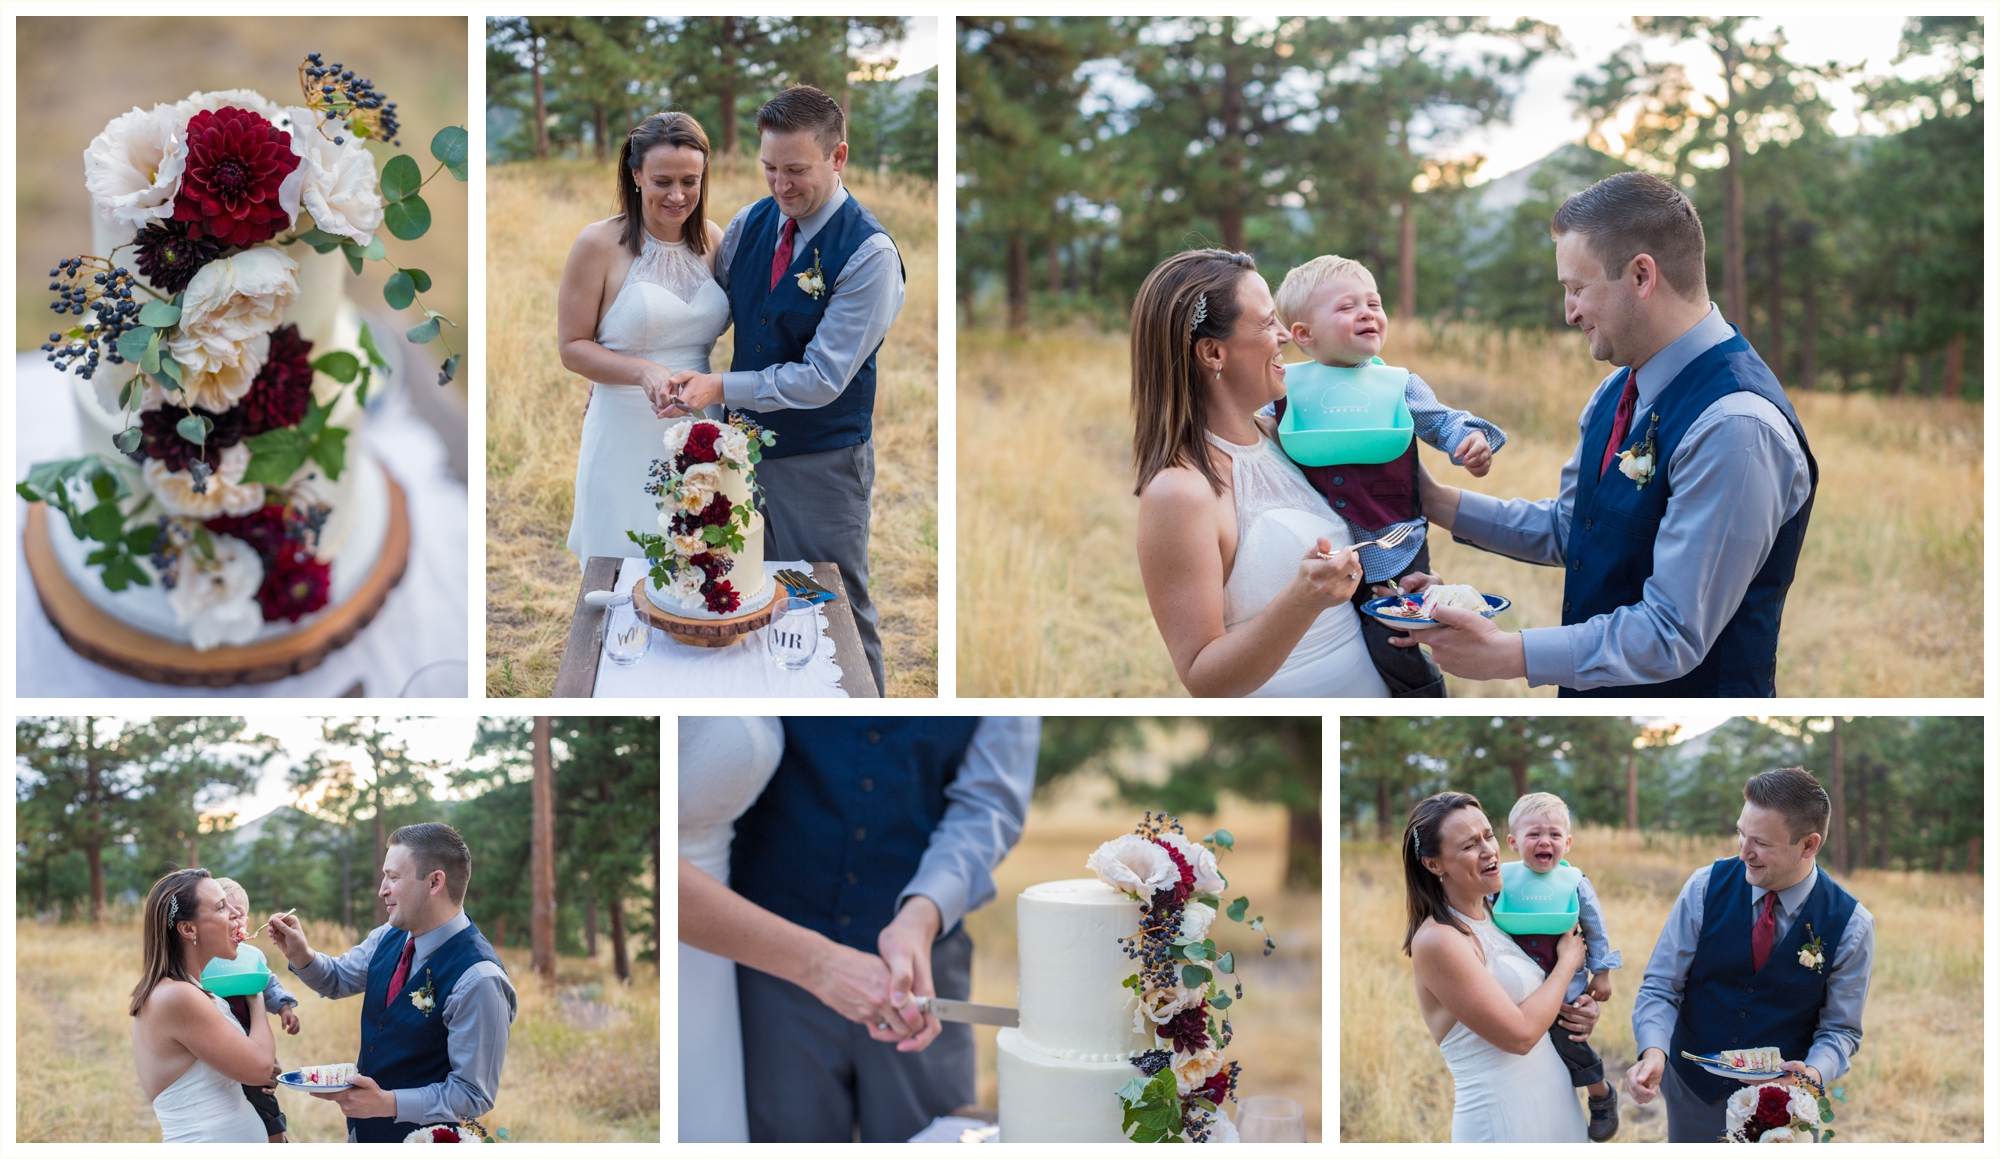 just married and feeding each other wedding cake at boulder canyon elopement